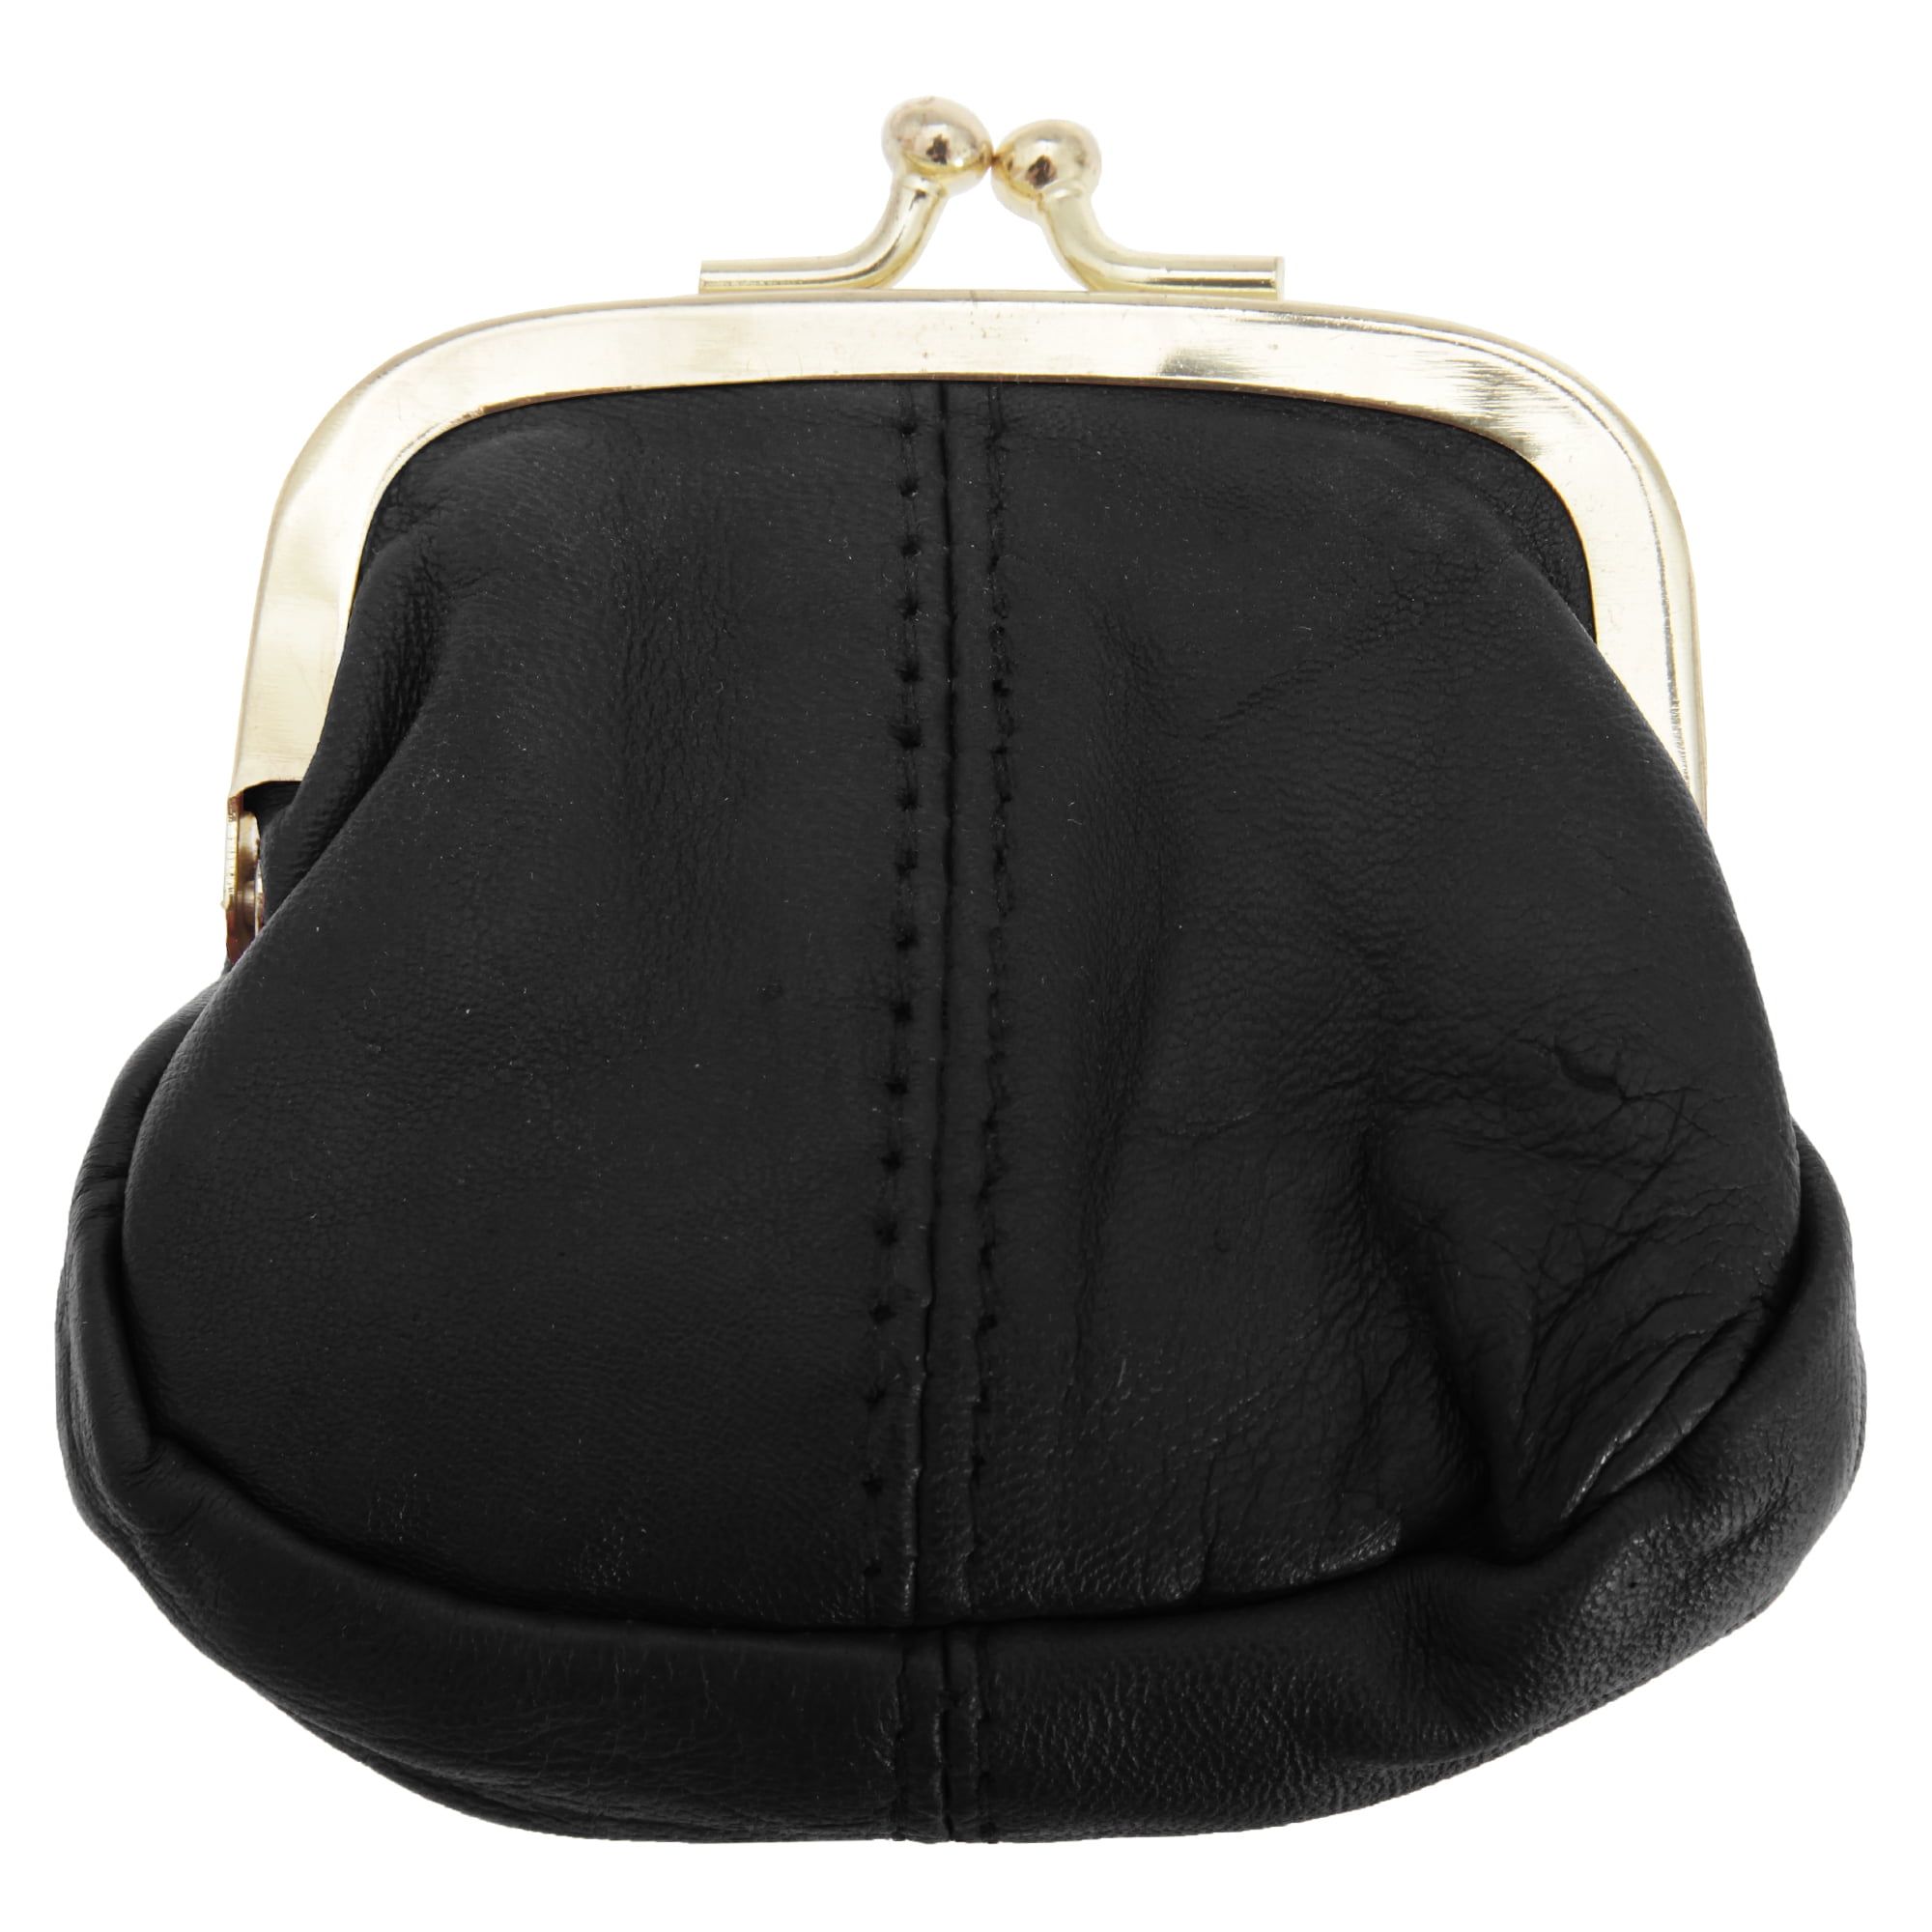 Womens Soft Leather Coin Purse With Metal Clasp 